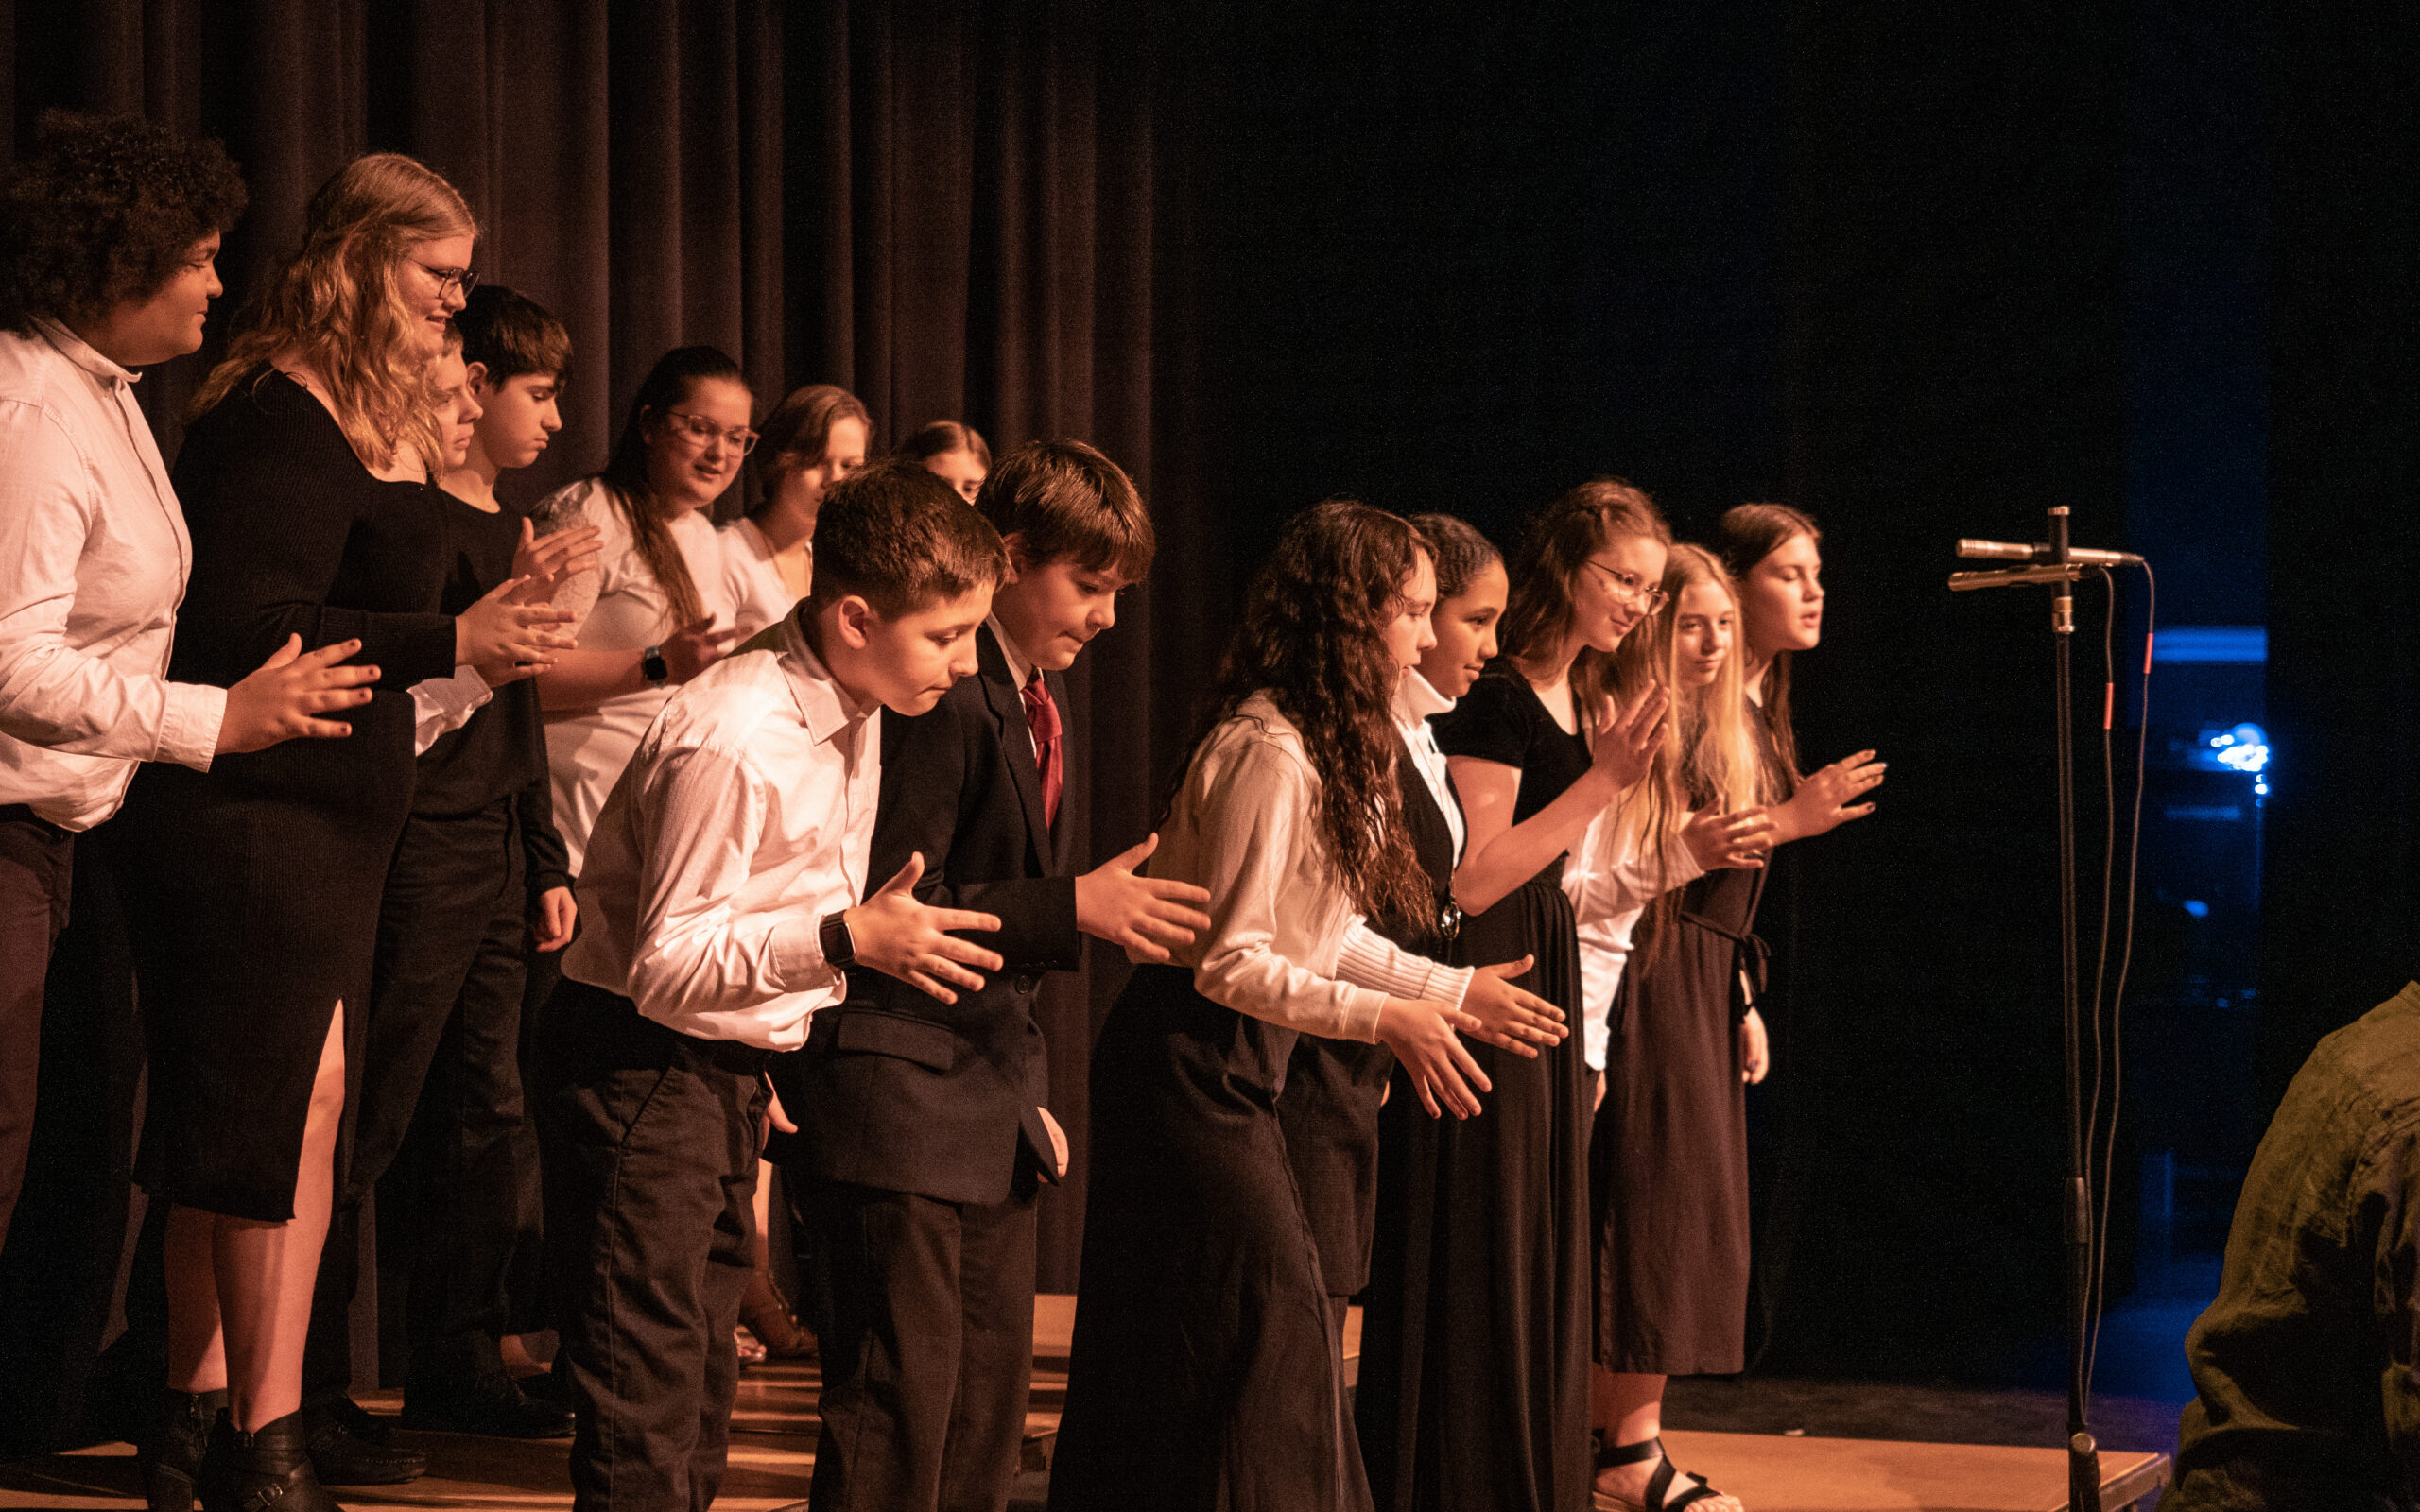 A group of middle school students dressed in a formal choir black and white clothes dance on stage